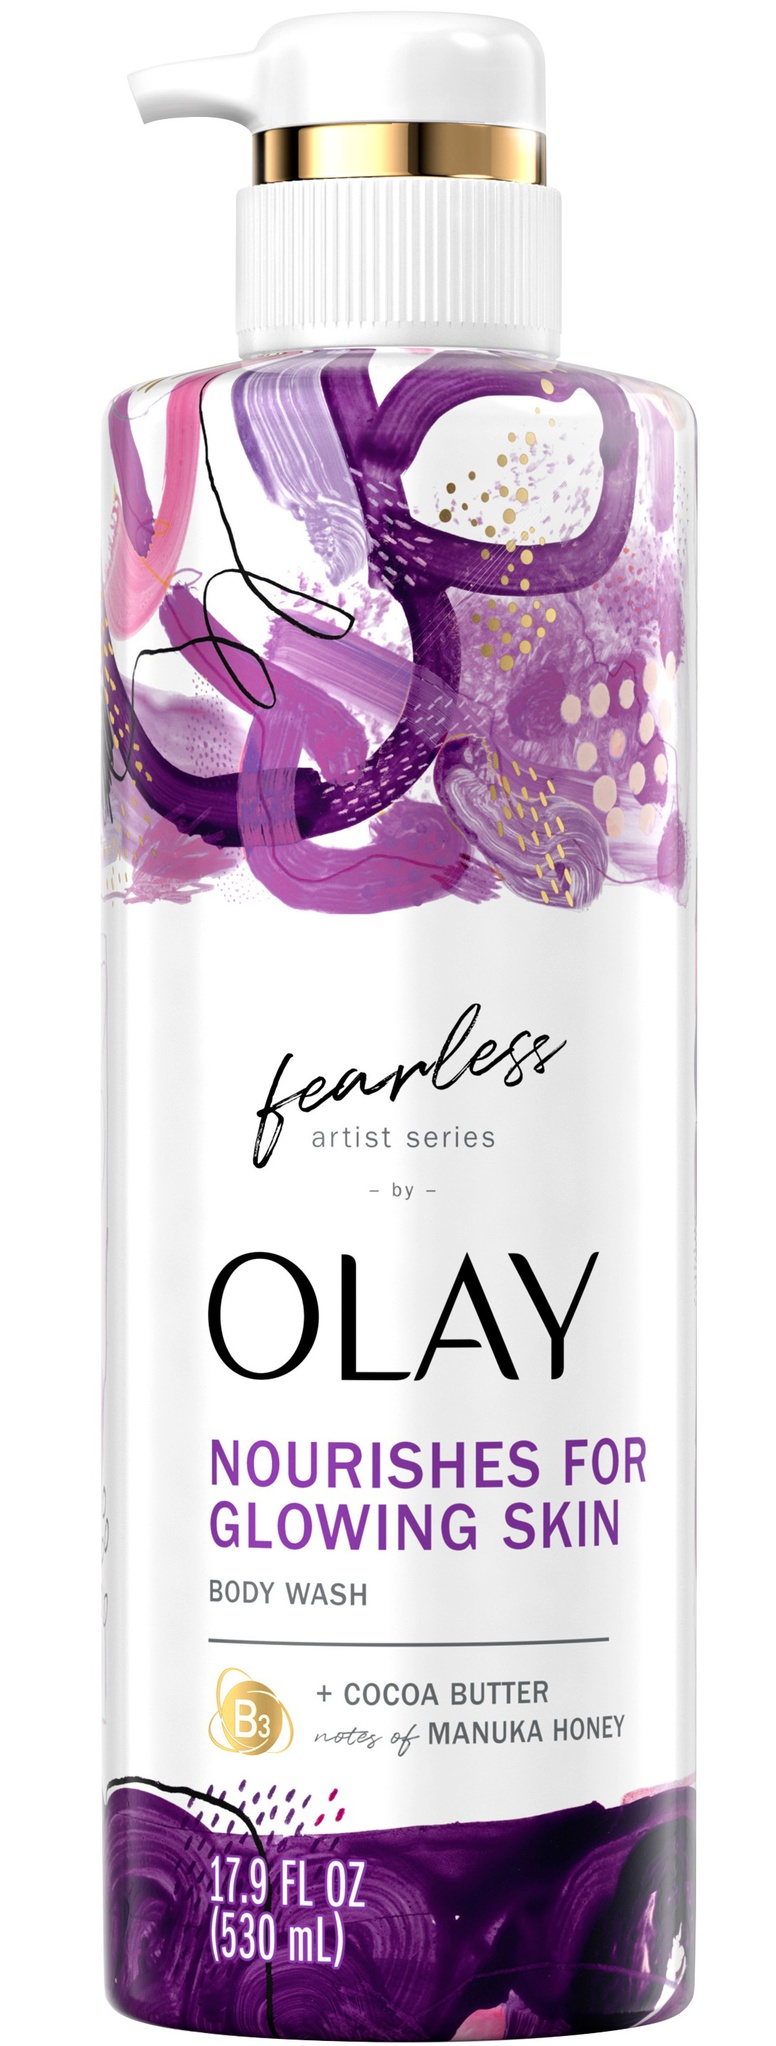 Olay Nourishing Moisture Body Wash With Cocoa Butter And Notes Of Manuka Honey